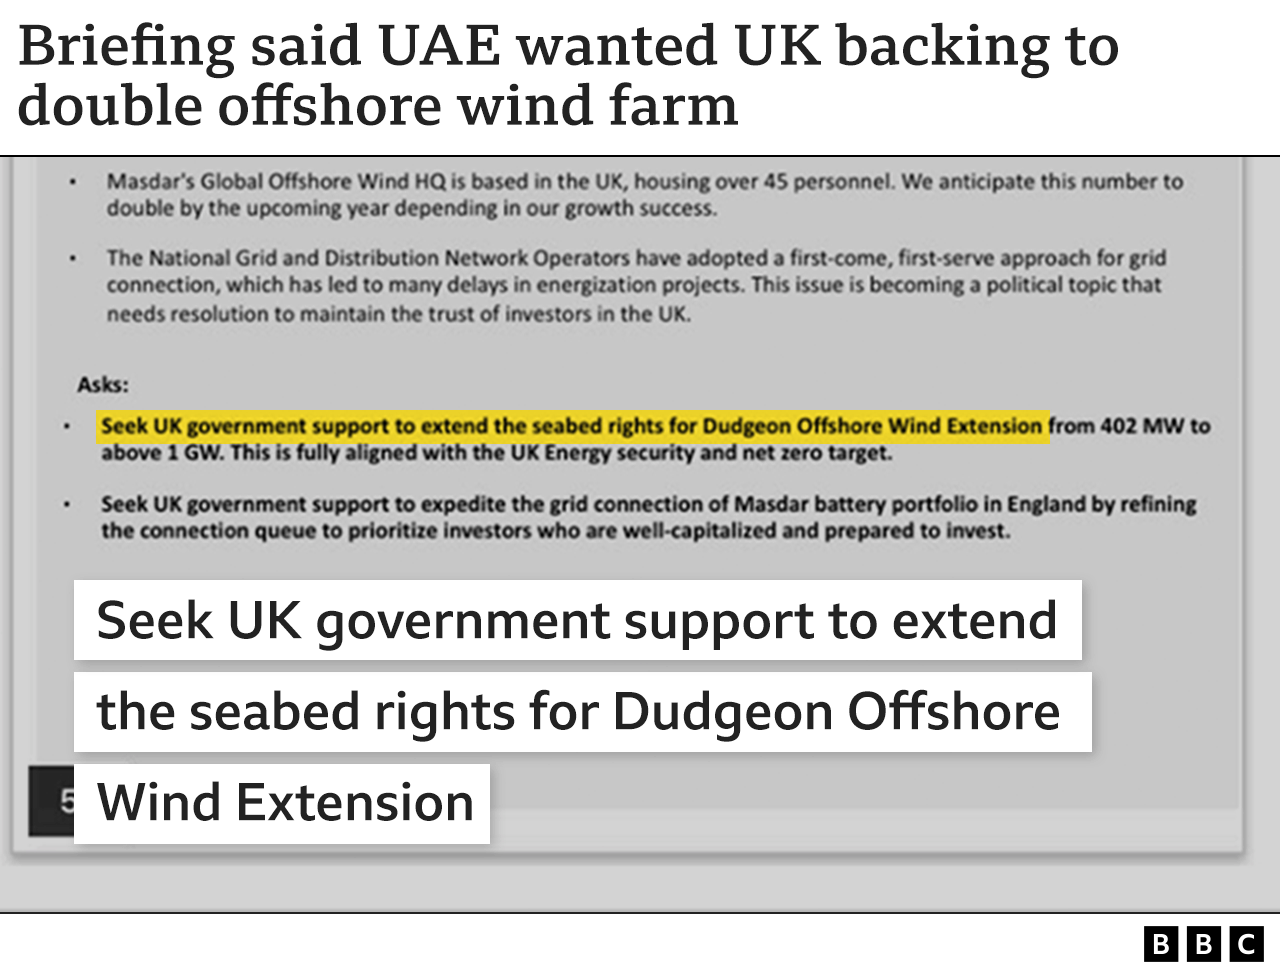 Graphic showing quote from briefing document for the UAE COP28 team's meeting with the UK, saying they would "seek UK government support to extend the seabed rights for Dudgeon Offshore Wind Extension"